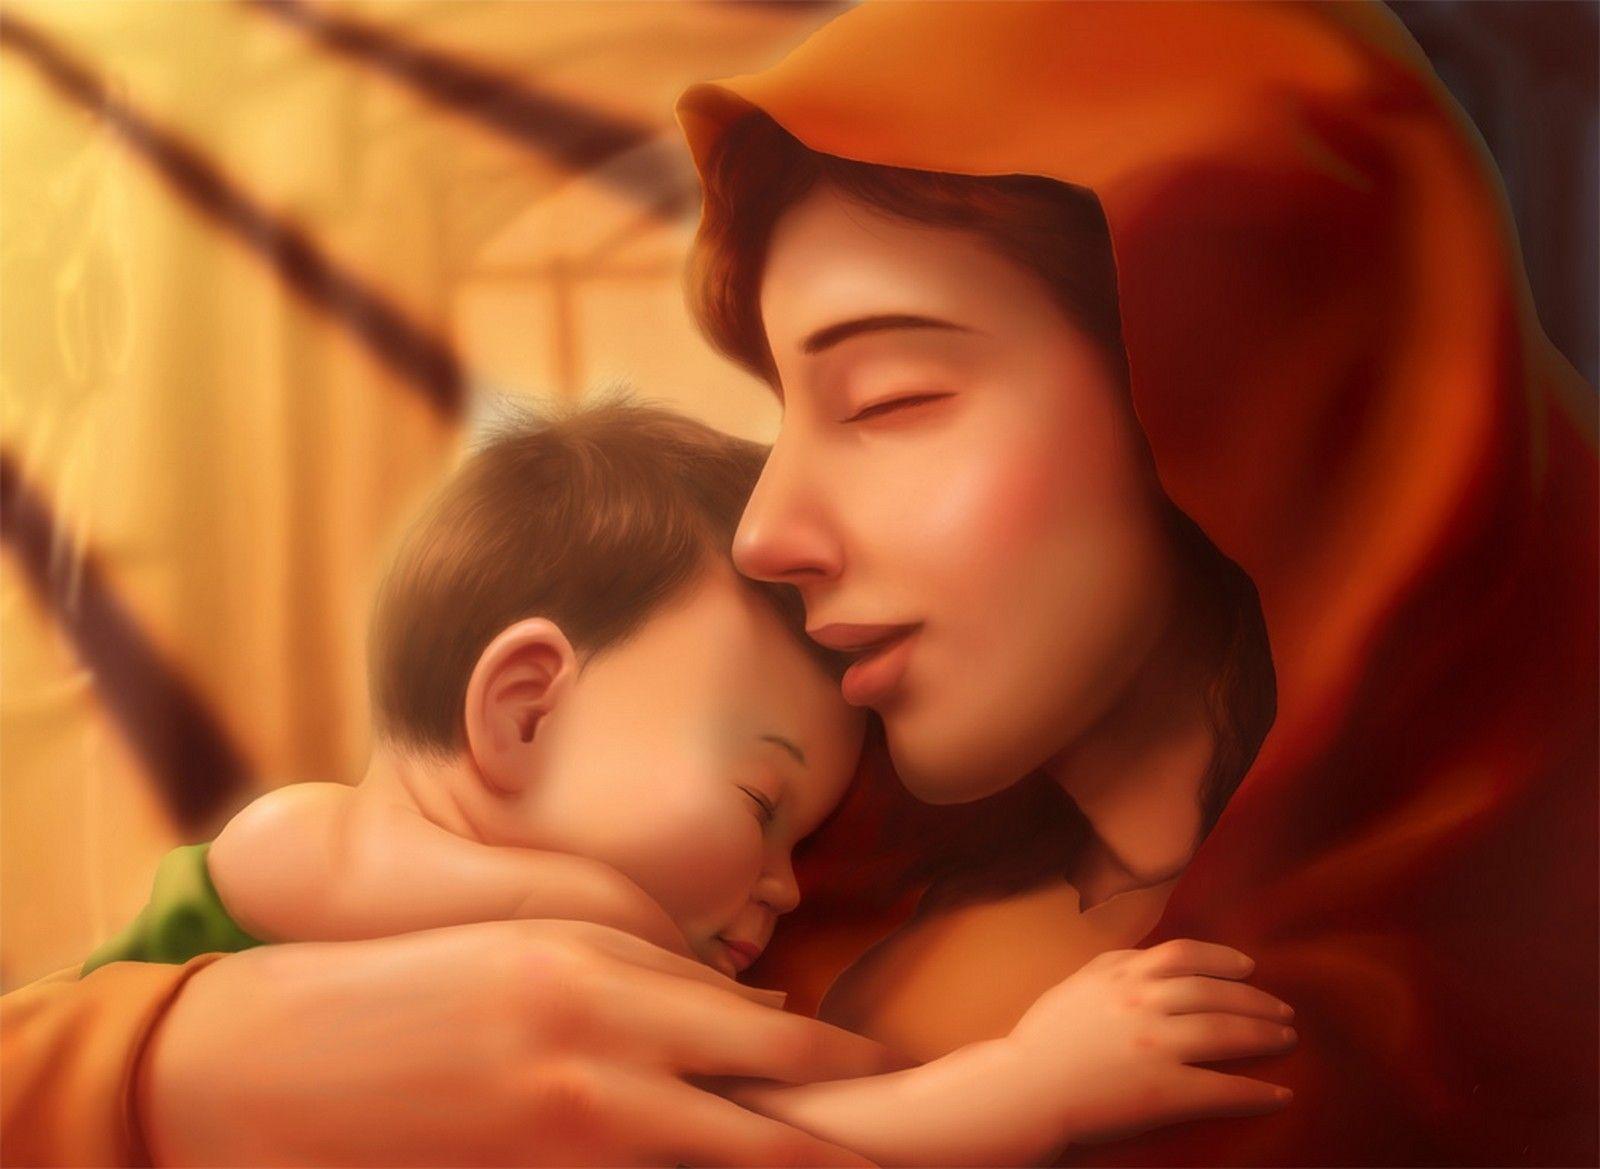 Mother And Baby Wallpaper. (68++ Wallpaper)